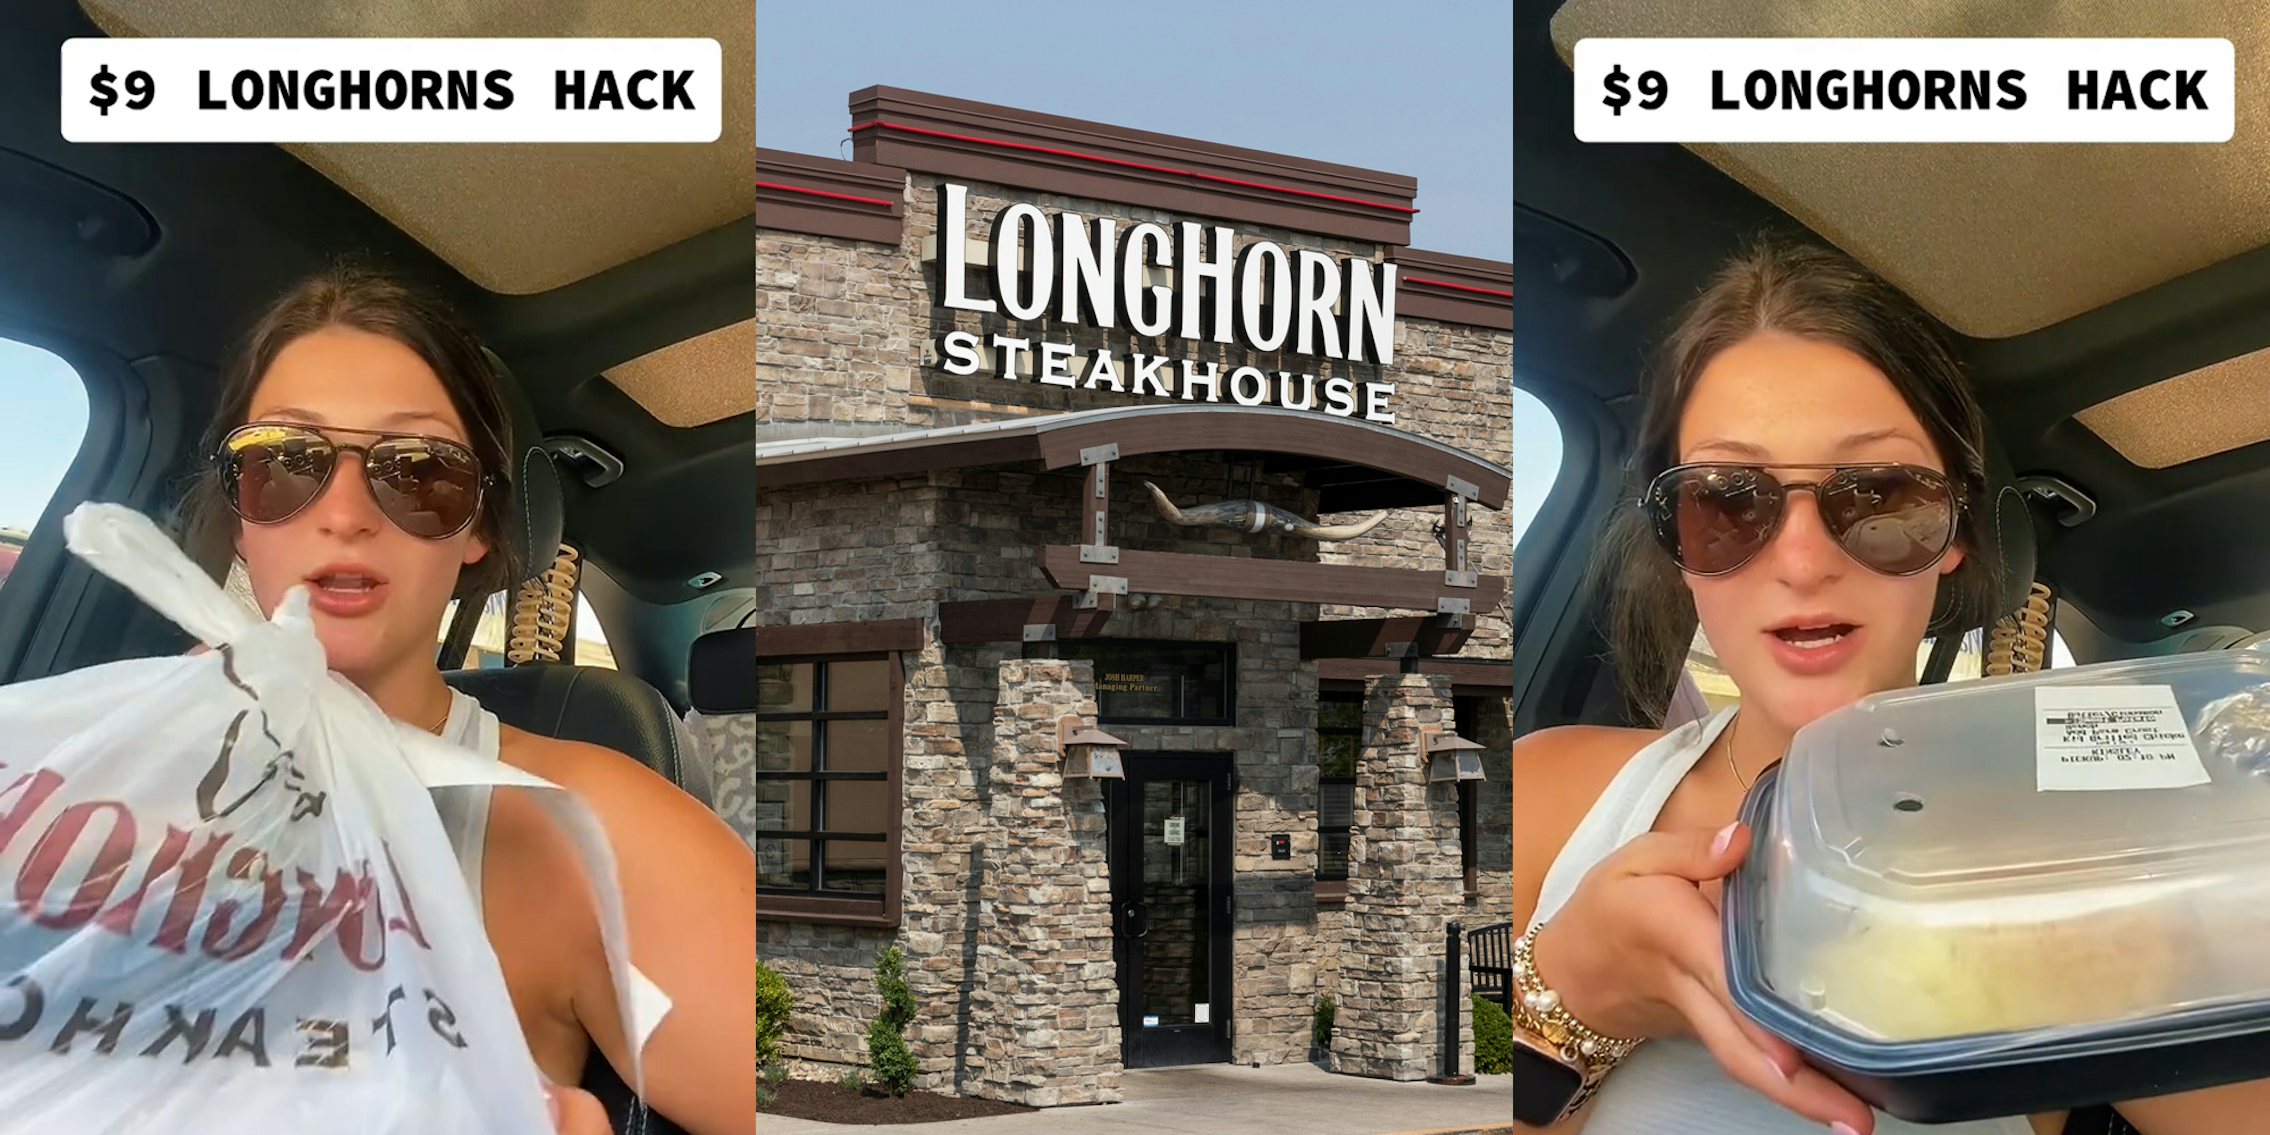 Longhorn Steakhouse customer speaking in car while holding meal with caption '$9 LONGHORNS HACK' (l) Longhorn Steakhouse building with sign (c) Longhorn Steakhouse customer speaking in car while holding meal with caption '$9 LONGHORNS HACK' (r)